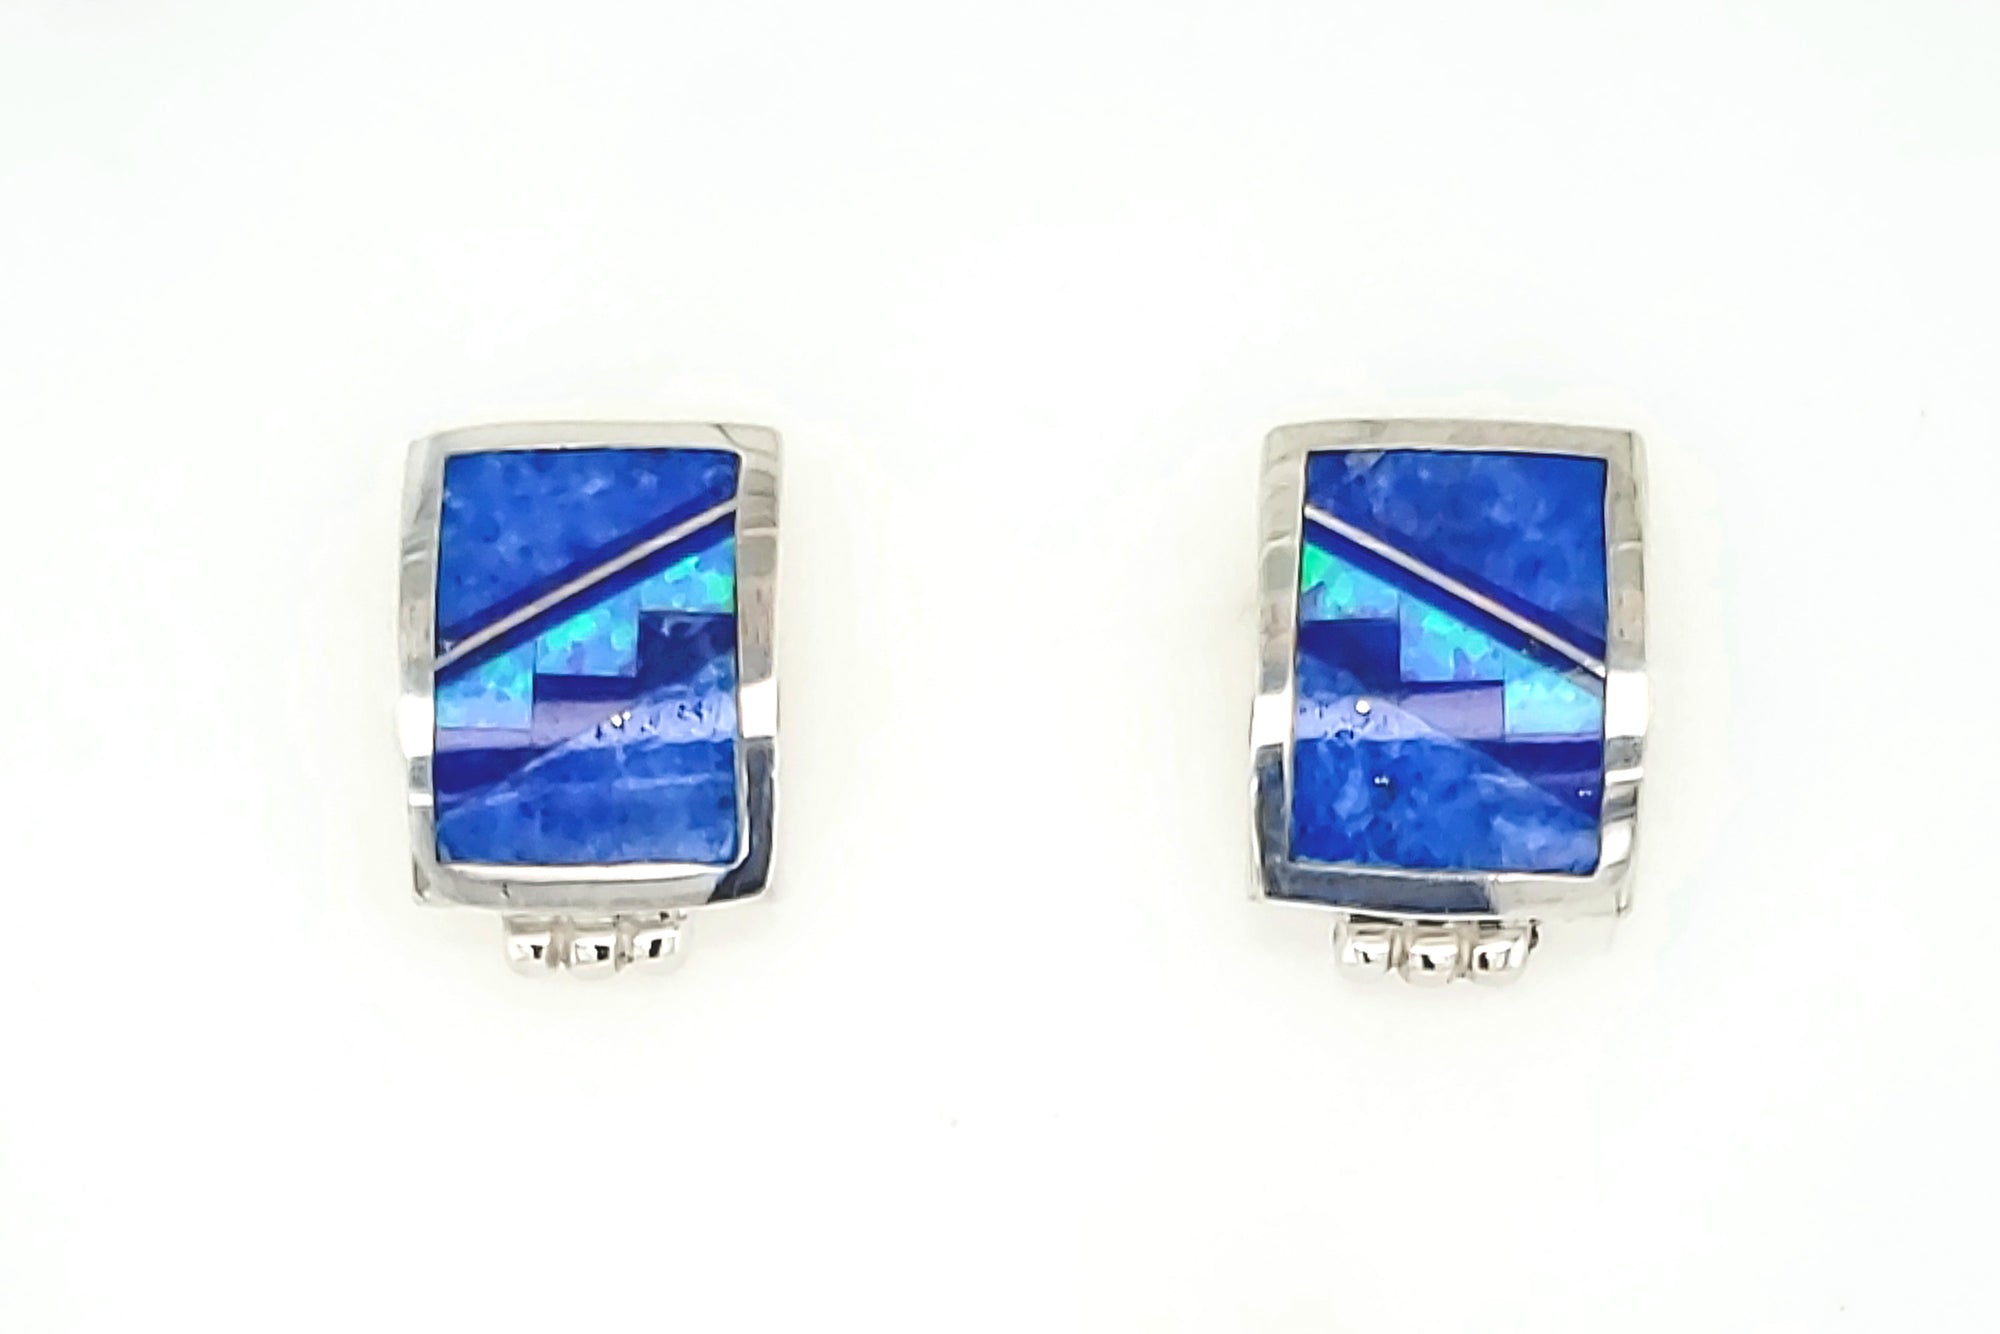 Small Square Blue Sky Earrings by David Rosales